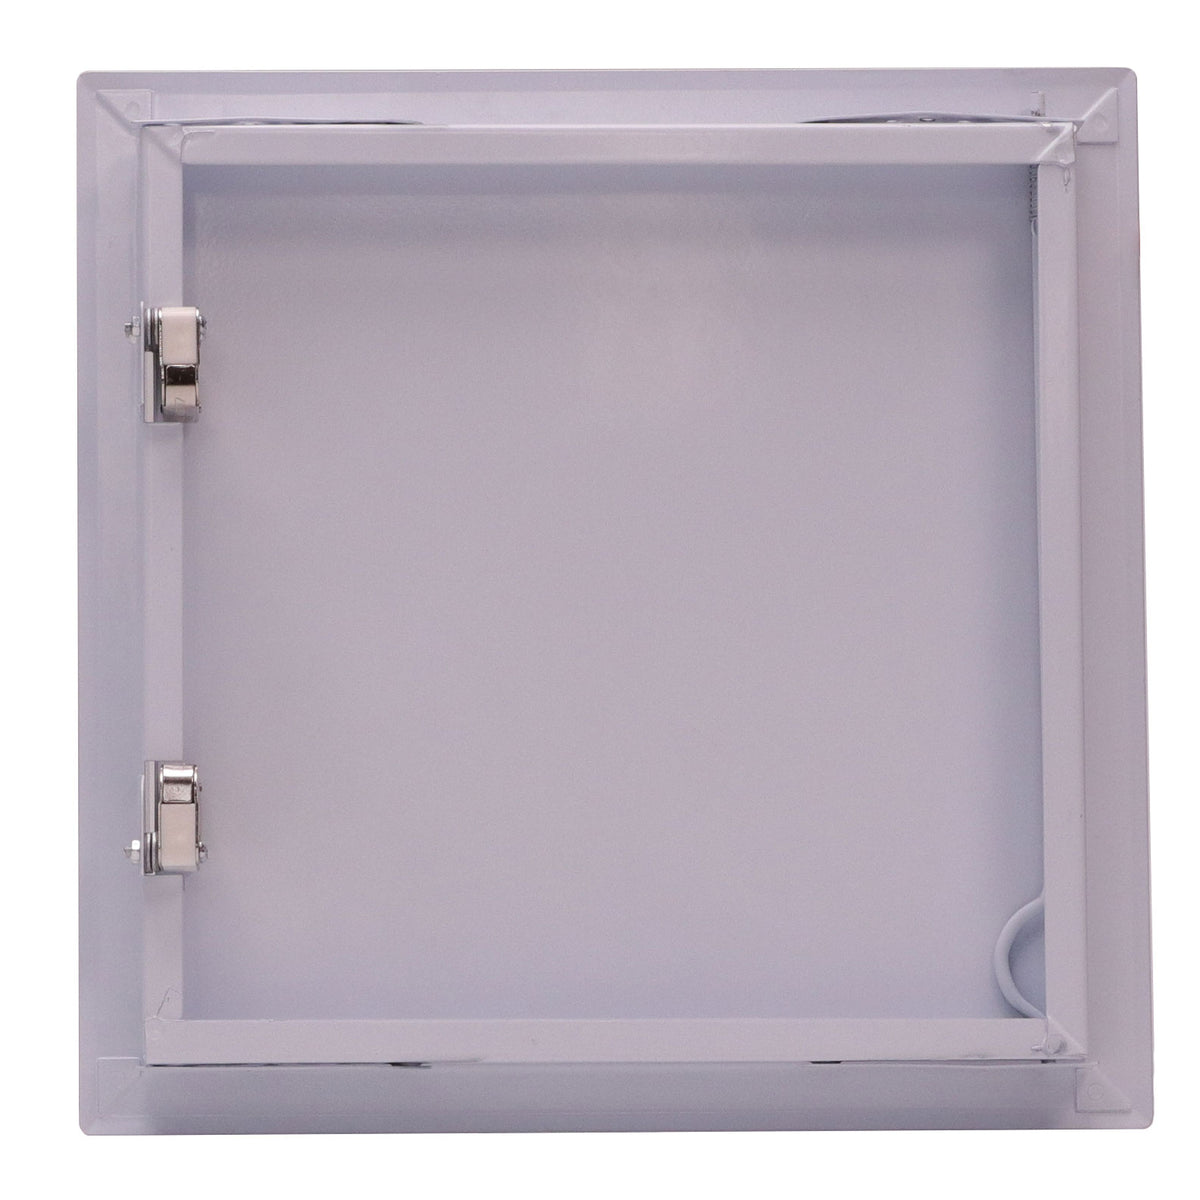 16&quot; X 16&quot; Universal Aluminum Access Panel Door For Wall / Ceiling Application (Push-Lock) With Solid Frame - [Outer Dimensions: 17&quot; Width X 17&quot; Height]